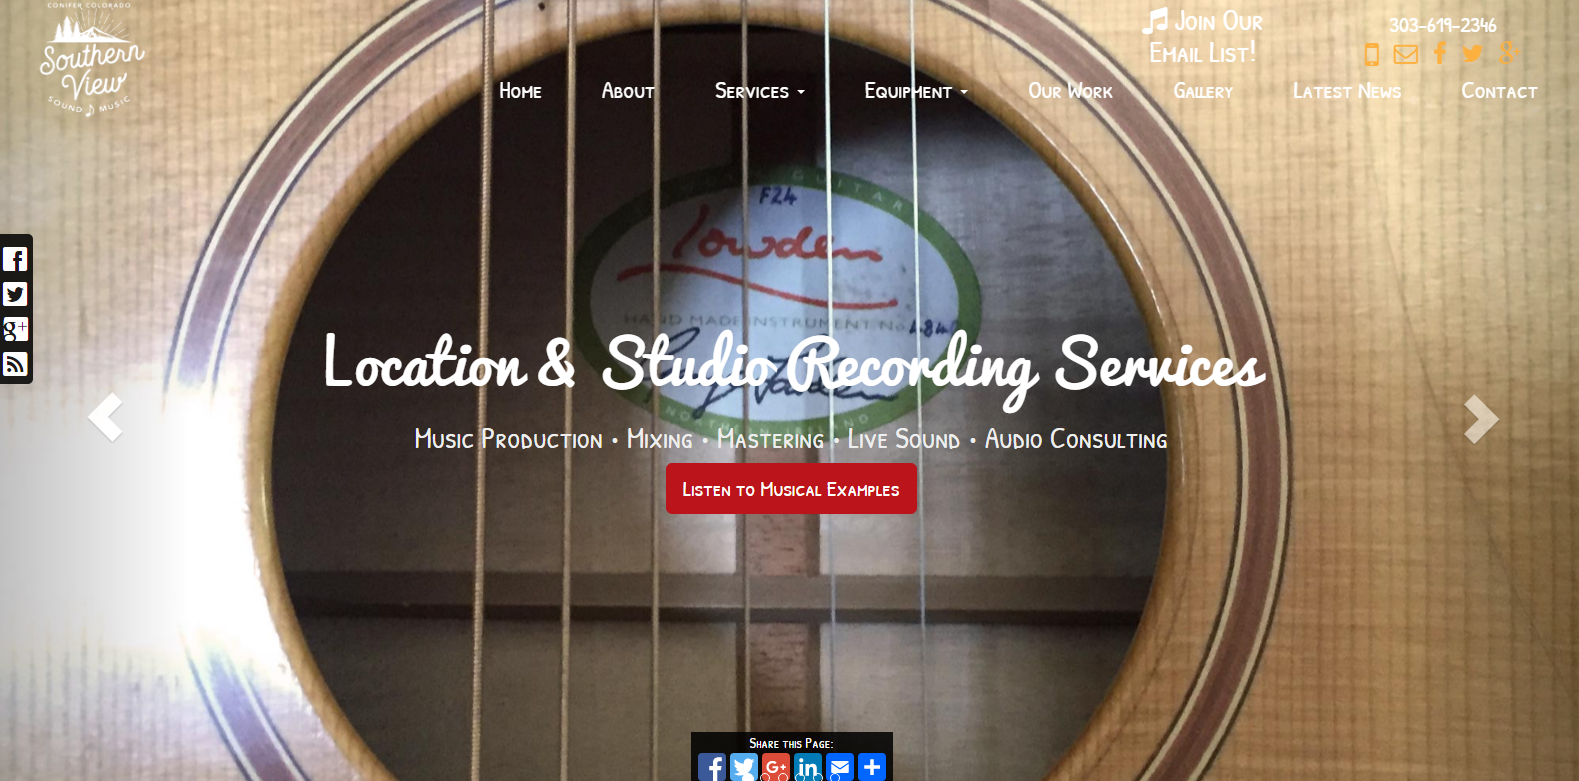 
New Website Launched: Southern View Sound & Music